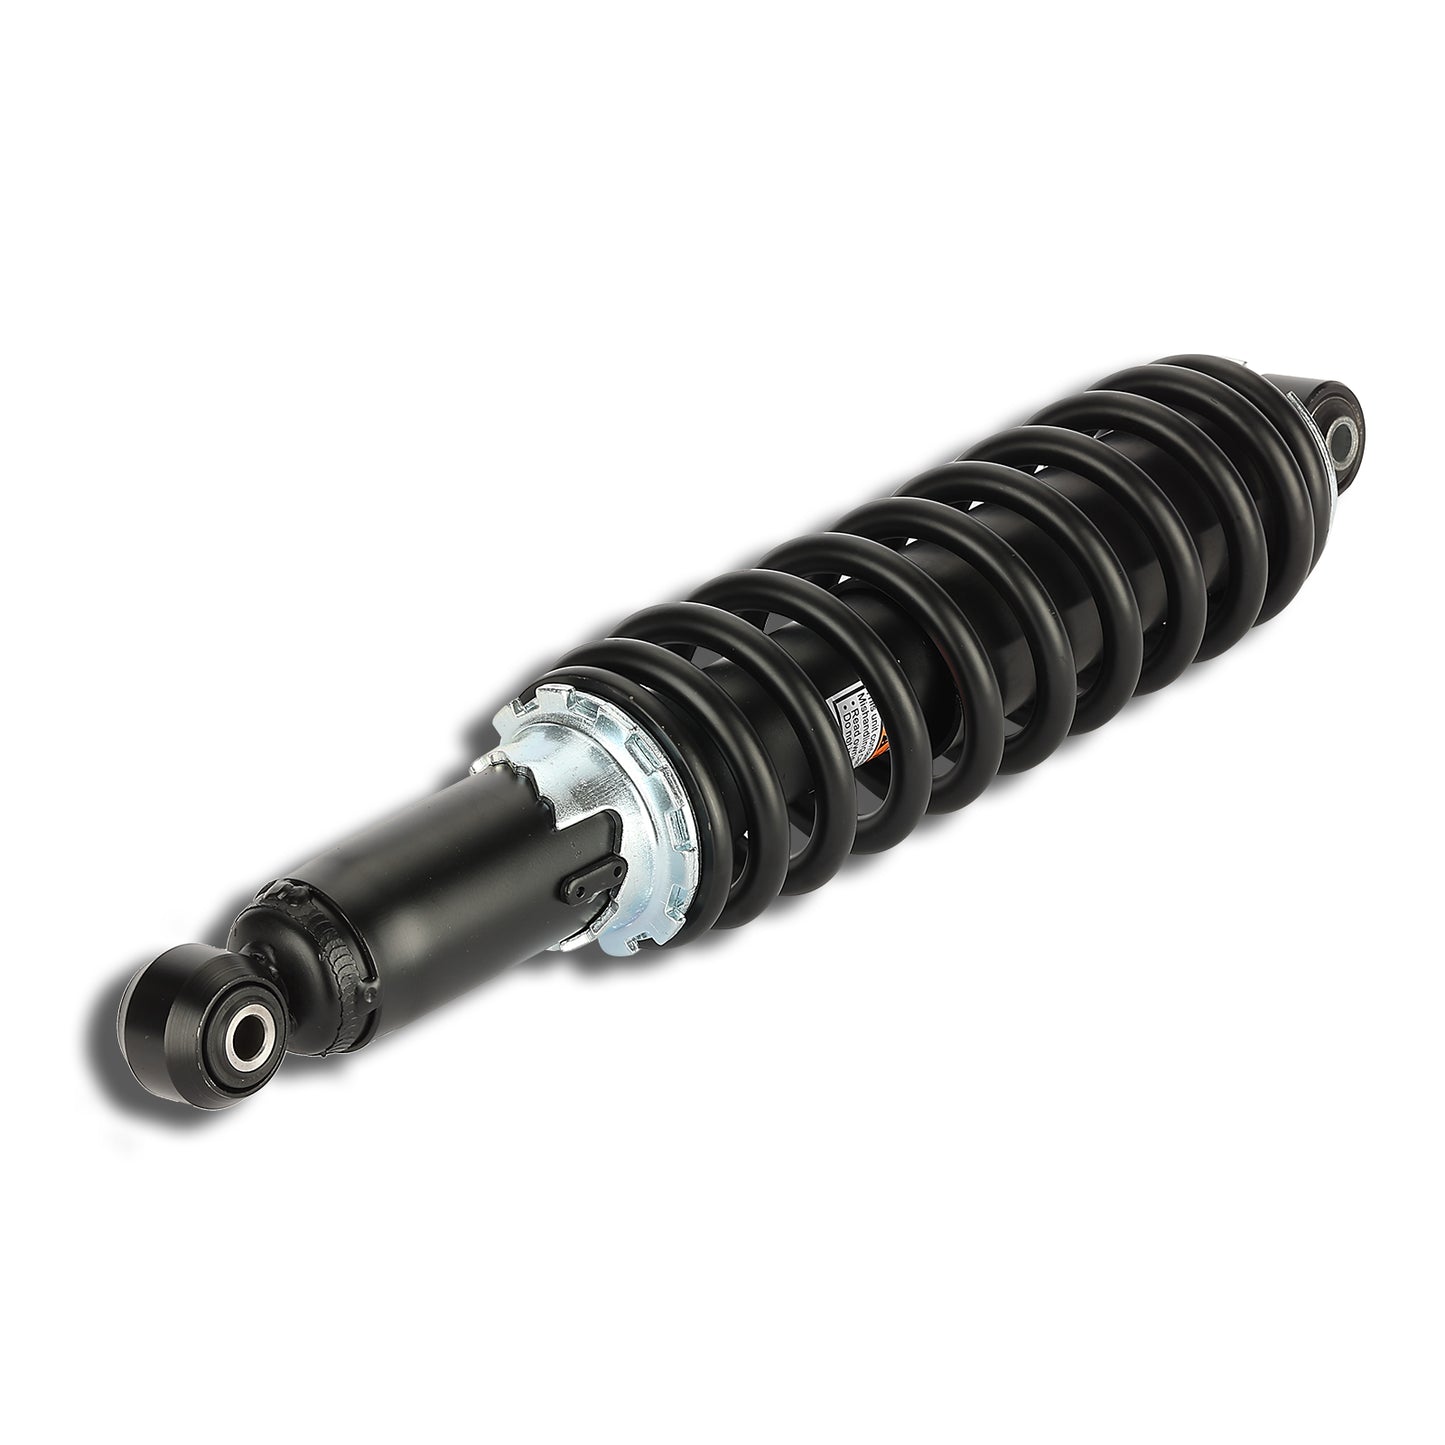 CAM-KW906 Caiman Shock Absorber ATV Front Left Right Shock Absorber Replacement for 2008-2012 Kawasaki Teryx 750 KRF750 Front Shock